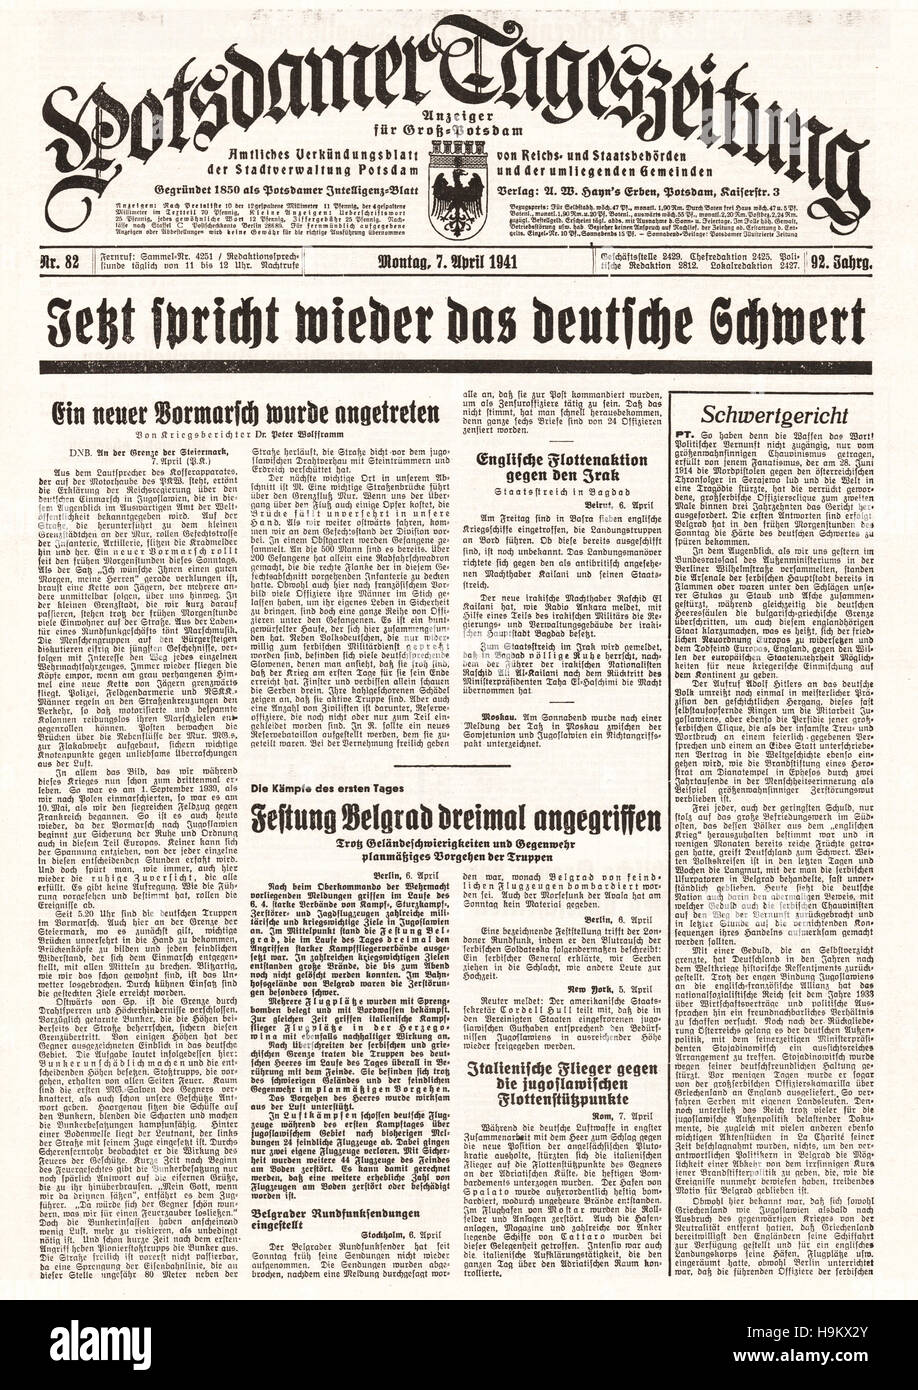 1941 Potsdamer Zeitung front page (Germany) Stock Photo